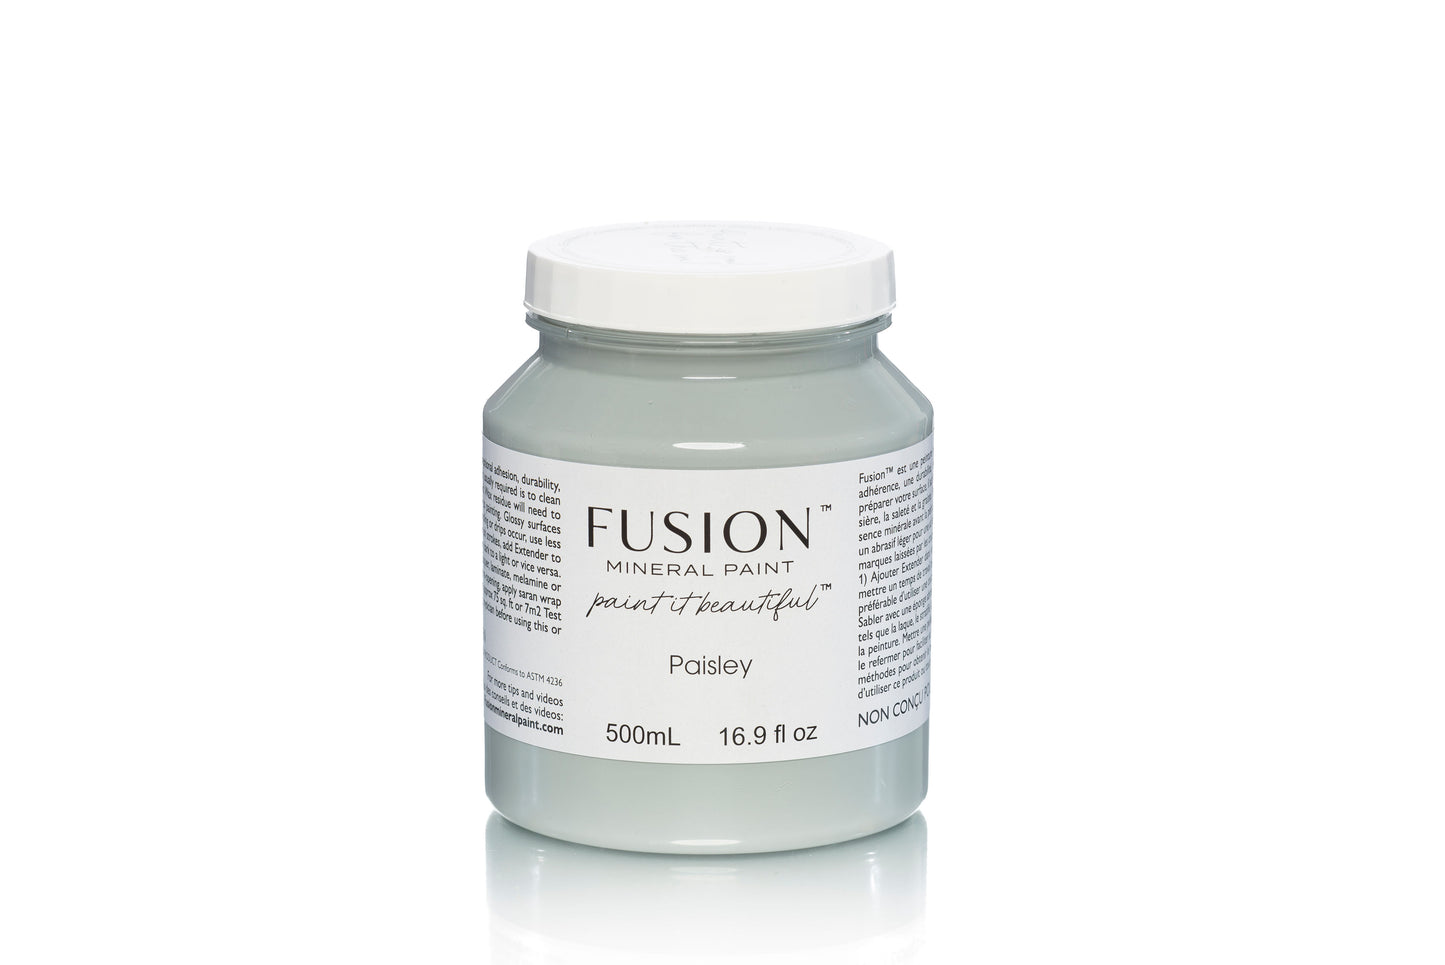 FUSION MINERAL PAINT- Paisley